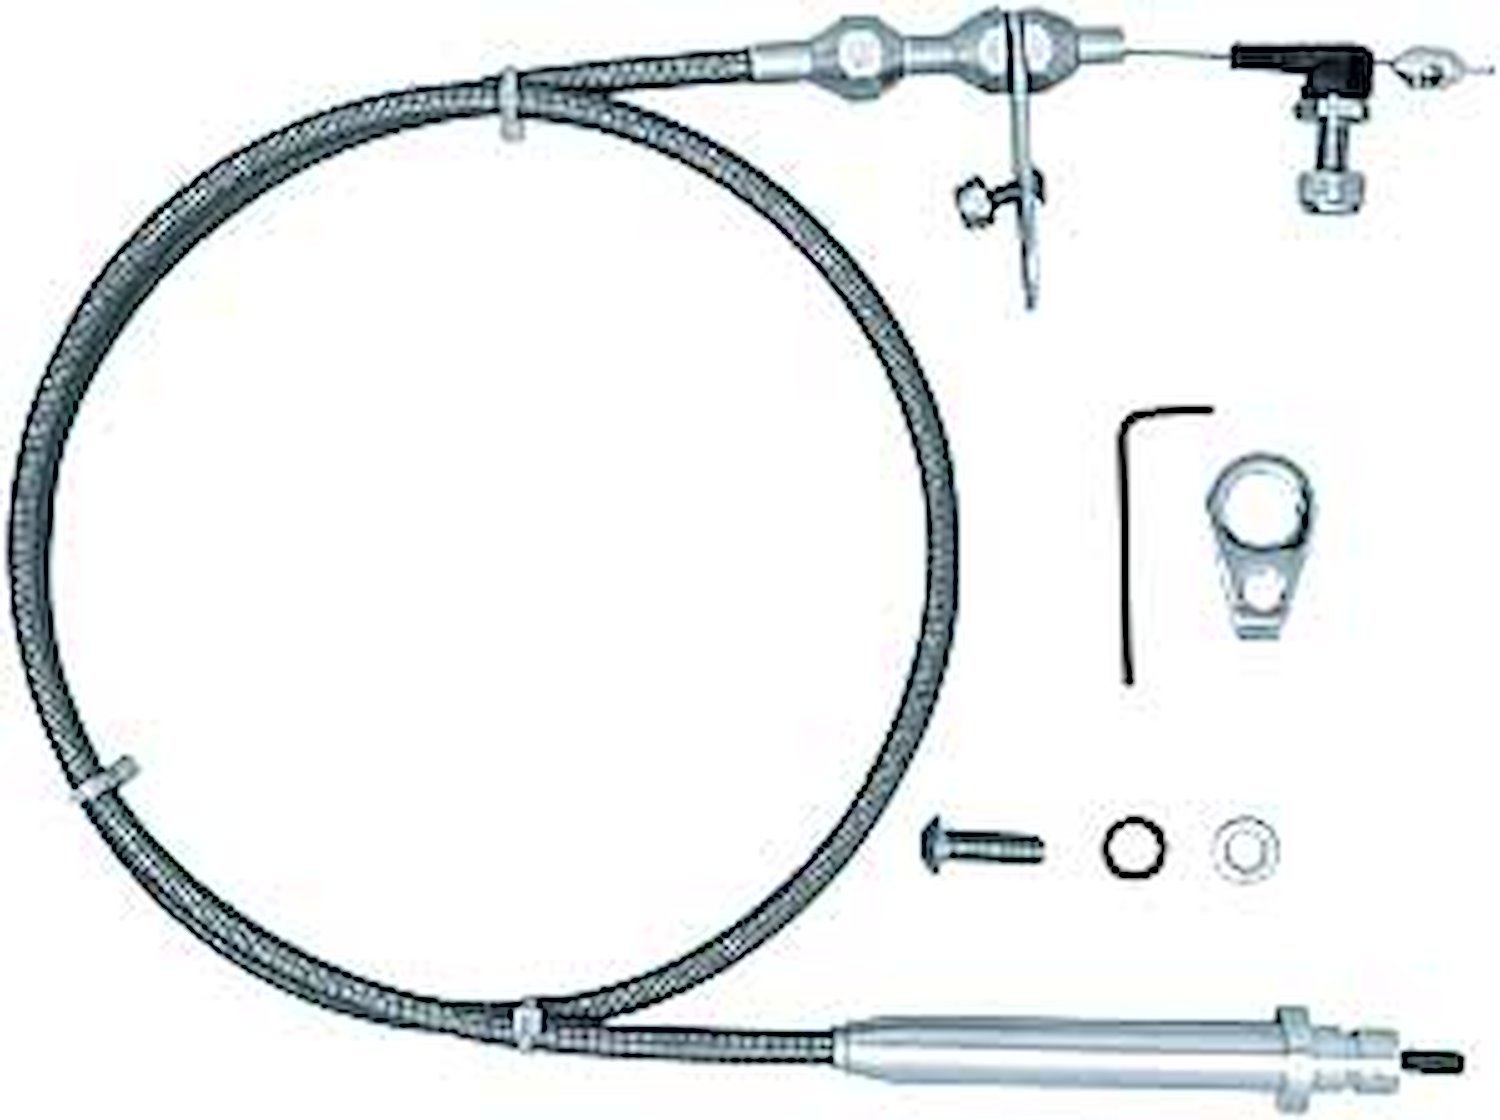 Chrysler TF-904 Stainless Steel Kickdown Cable Kit Polished Aluminum Fittings and Ferrule